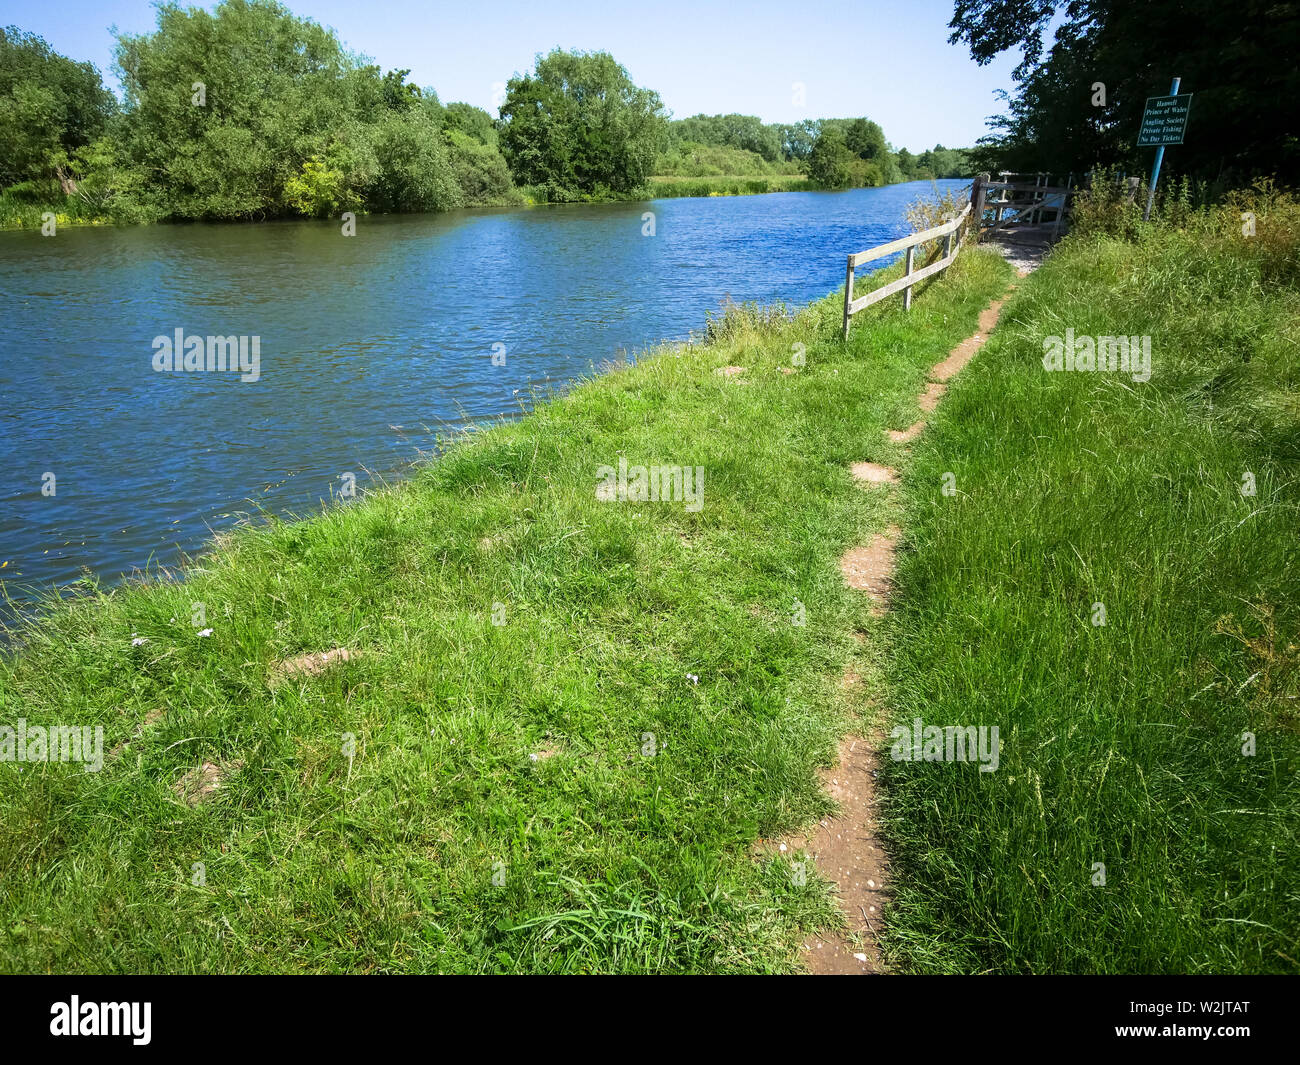 The Ridgeway Ancient Road, Running Next to The River Thames, Little Stoke, Oxfordshire, England, UK, GB. Stock Photo